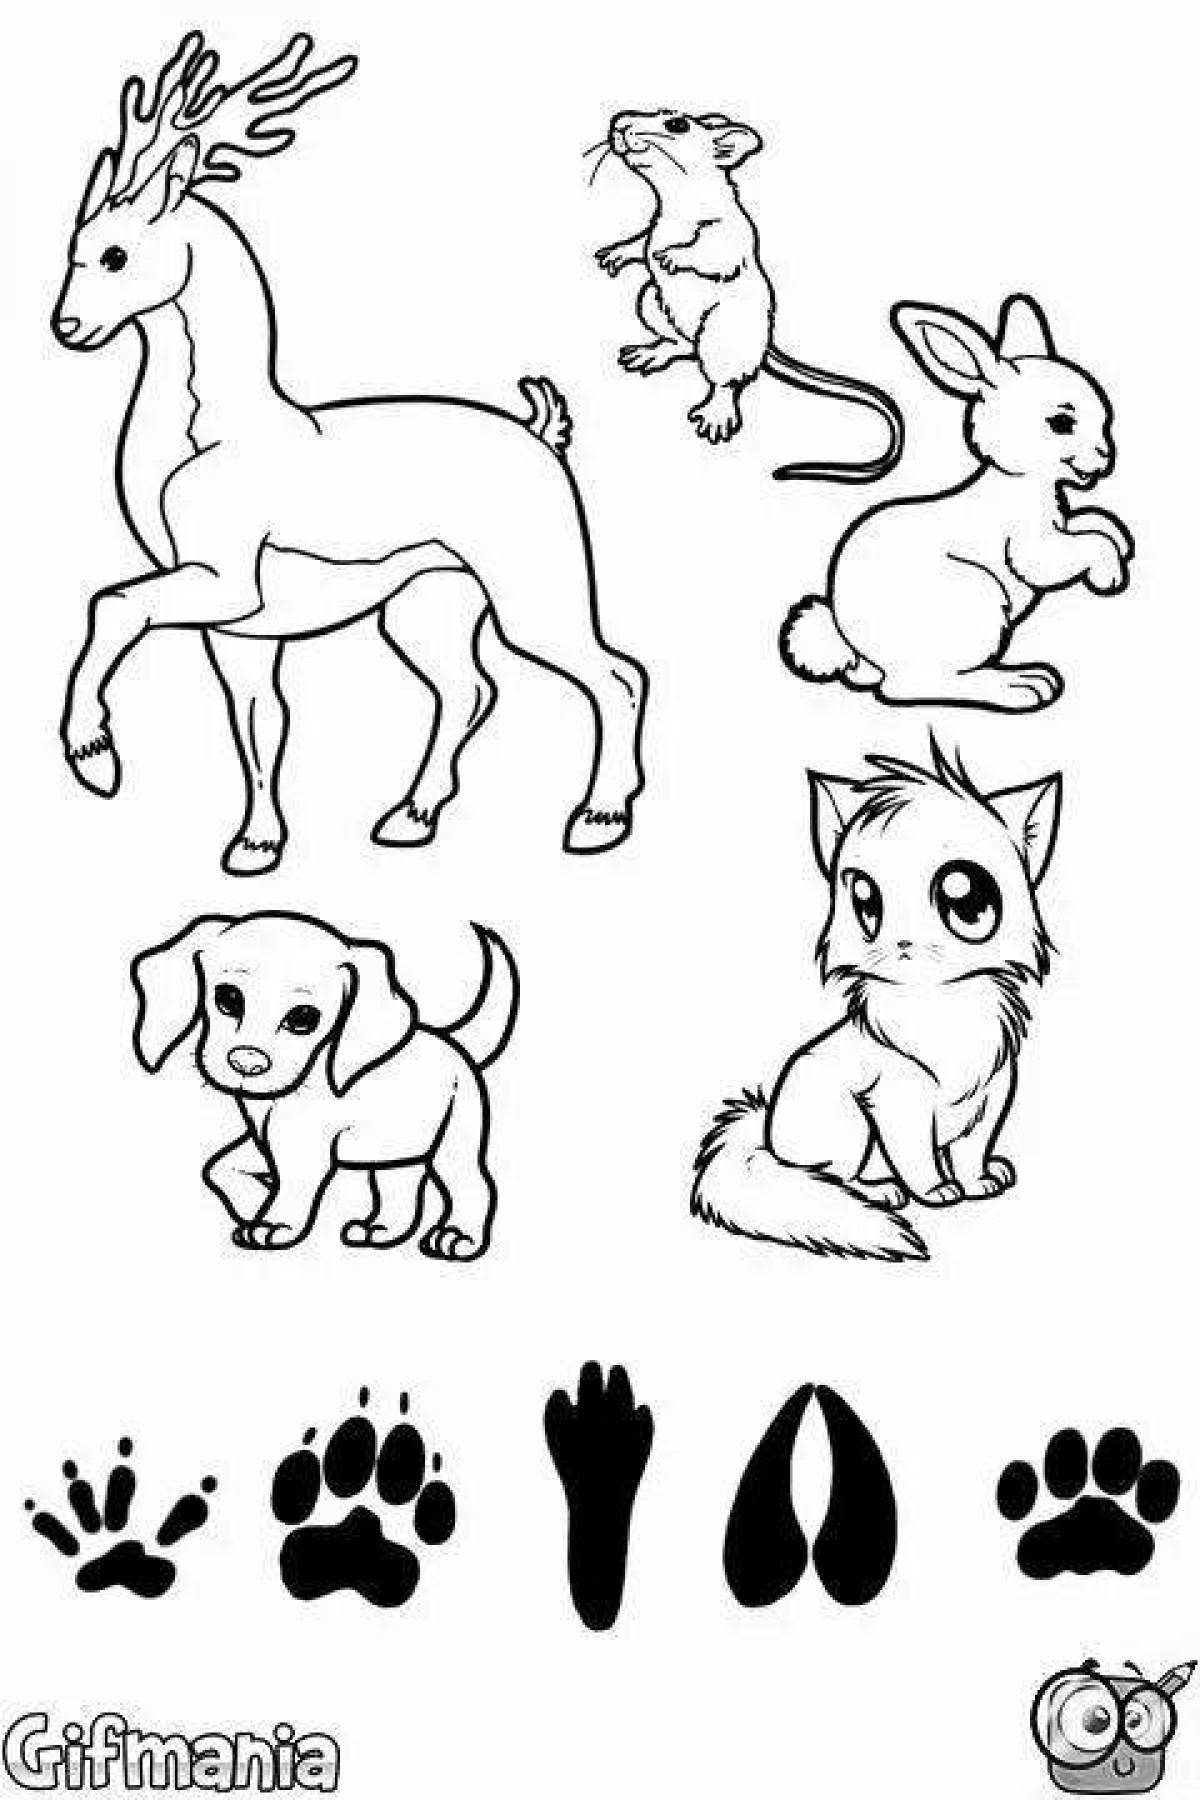 Exciting animal footprint coloring pages